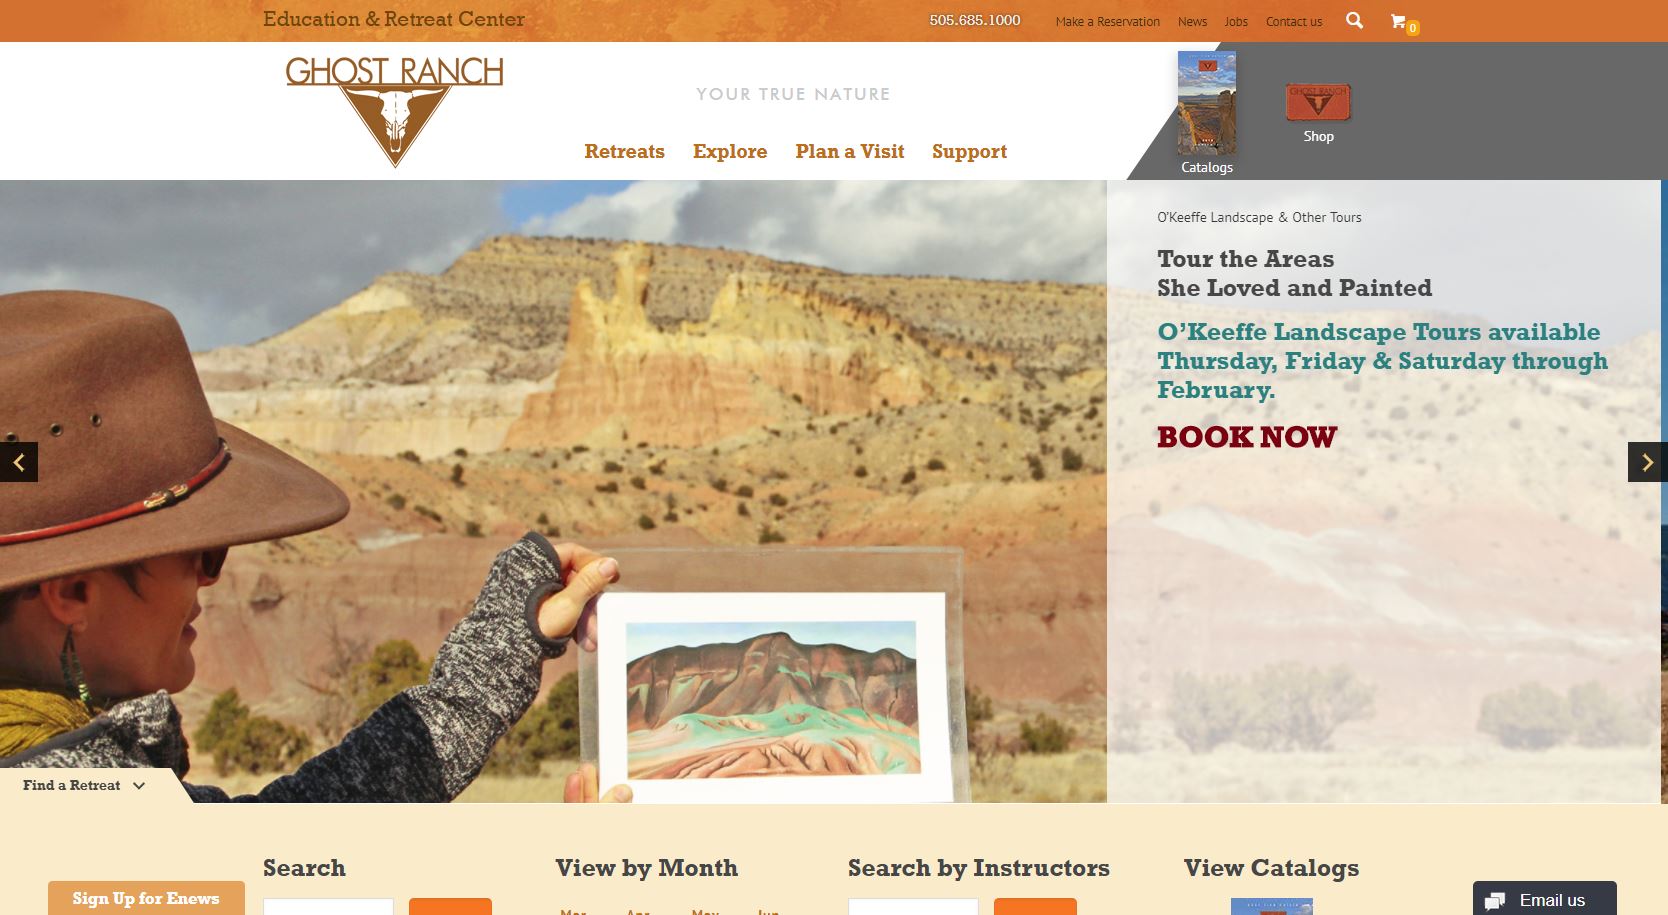 Ghost Ranch Education and Retreat Center.